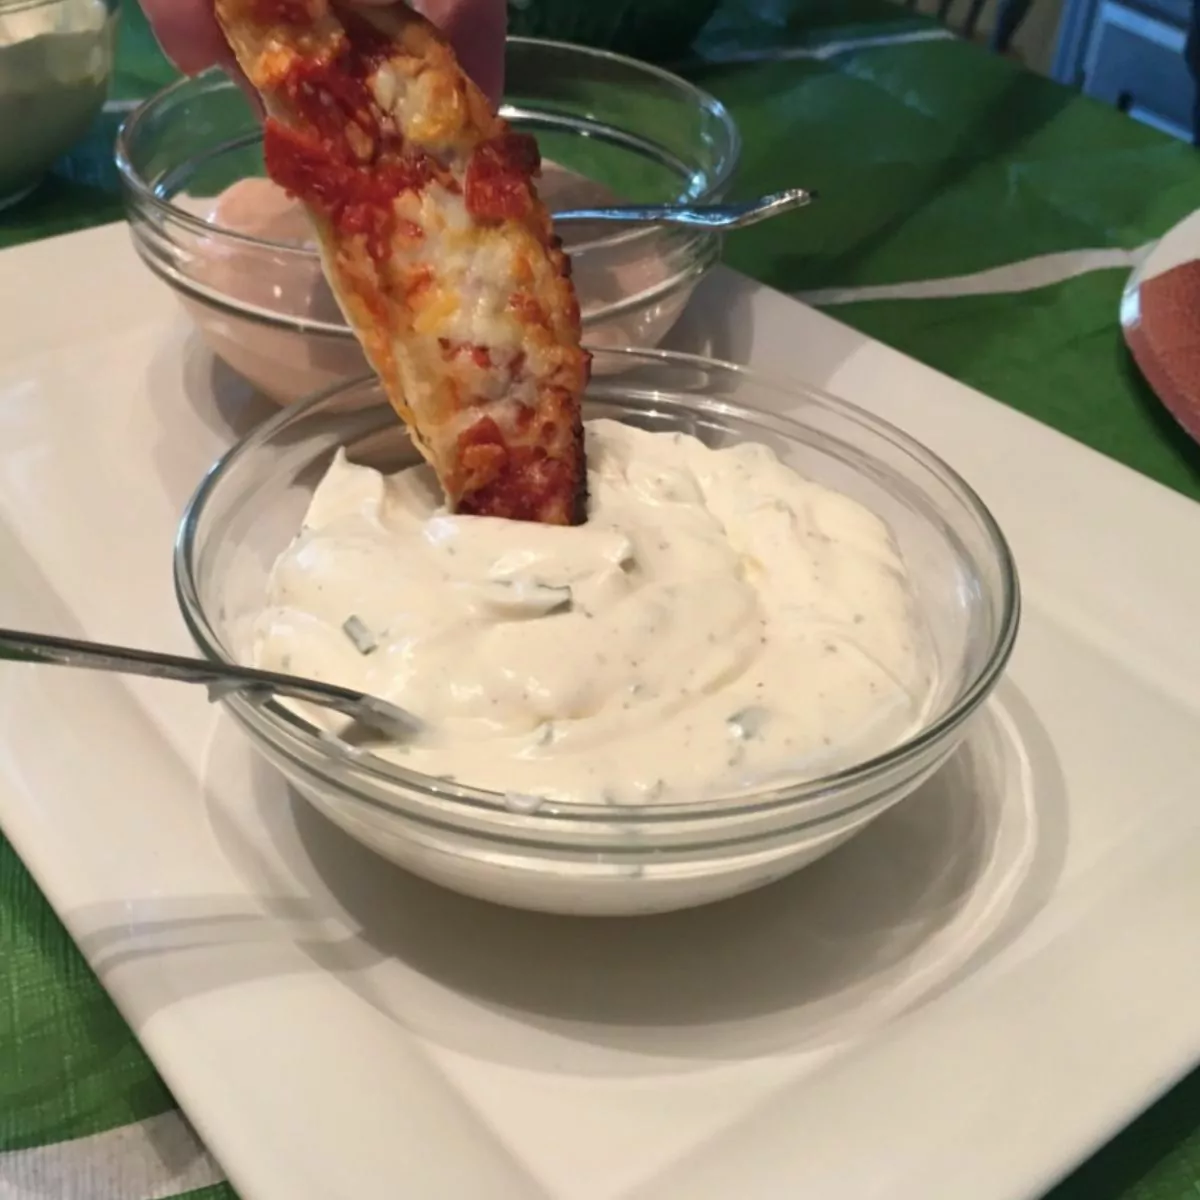 Piece of pizza dipping into ranch dressing.